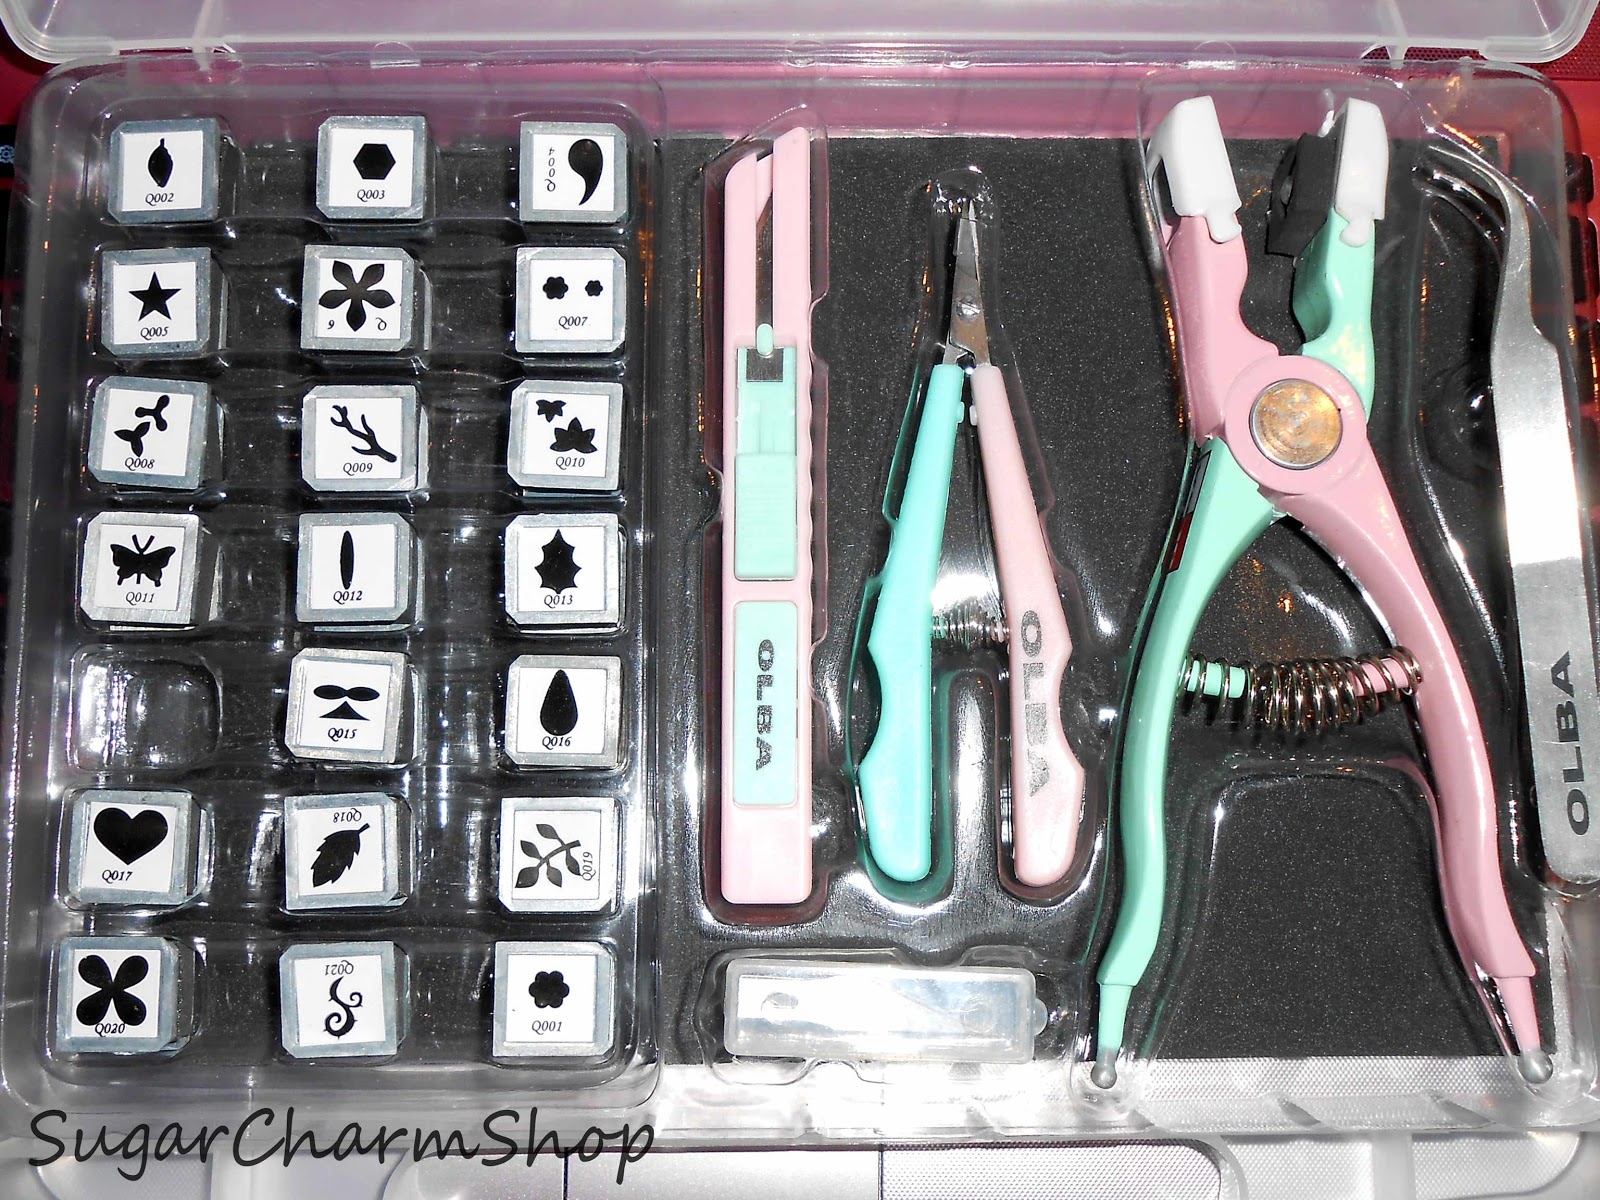 Paper Punch Set - Small (5/8-15/16) - fit our resin molds and